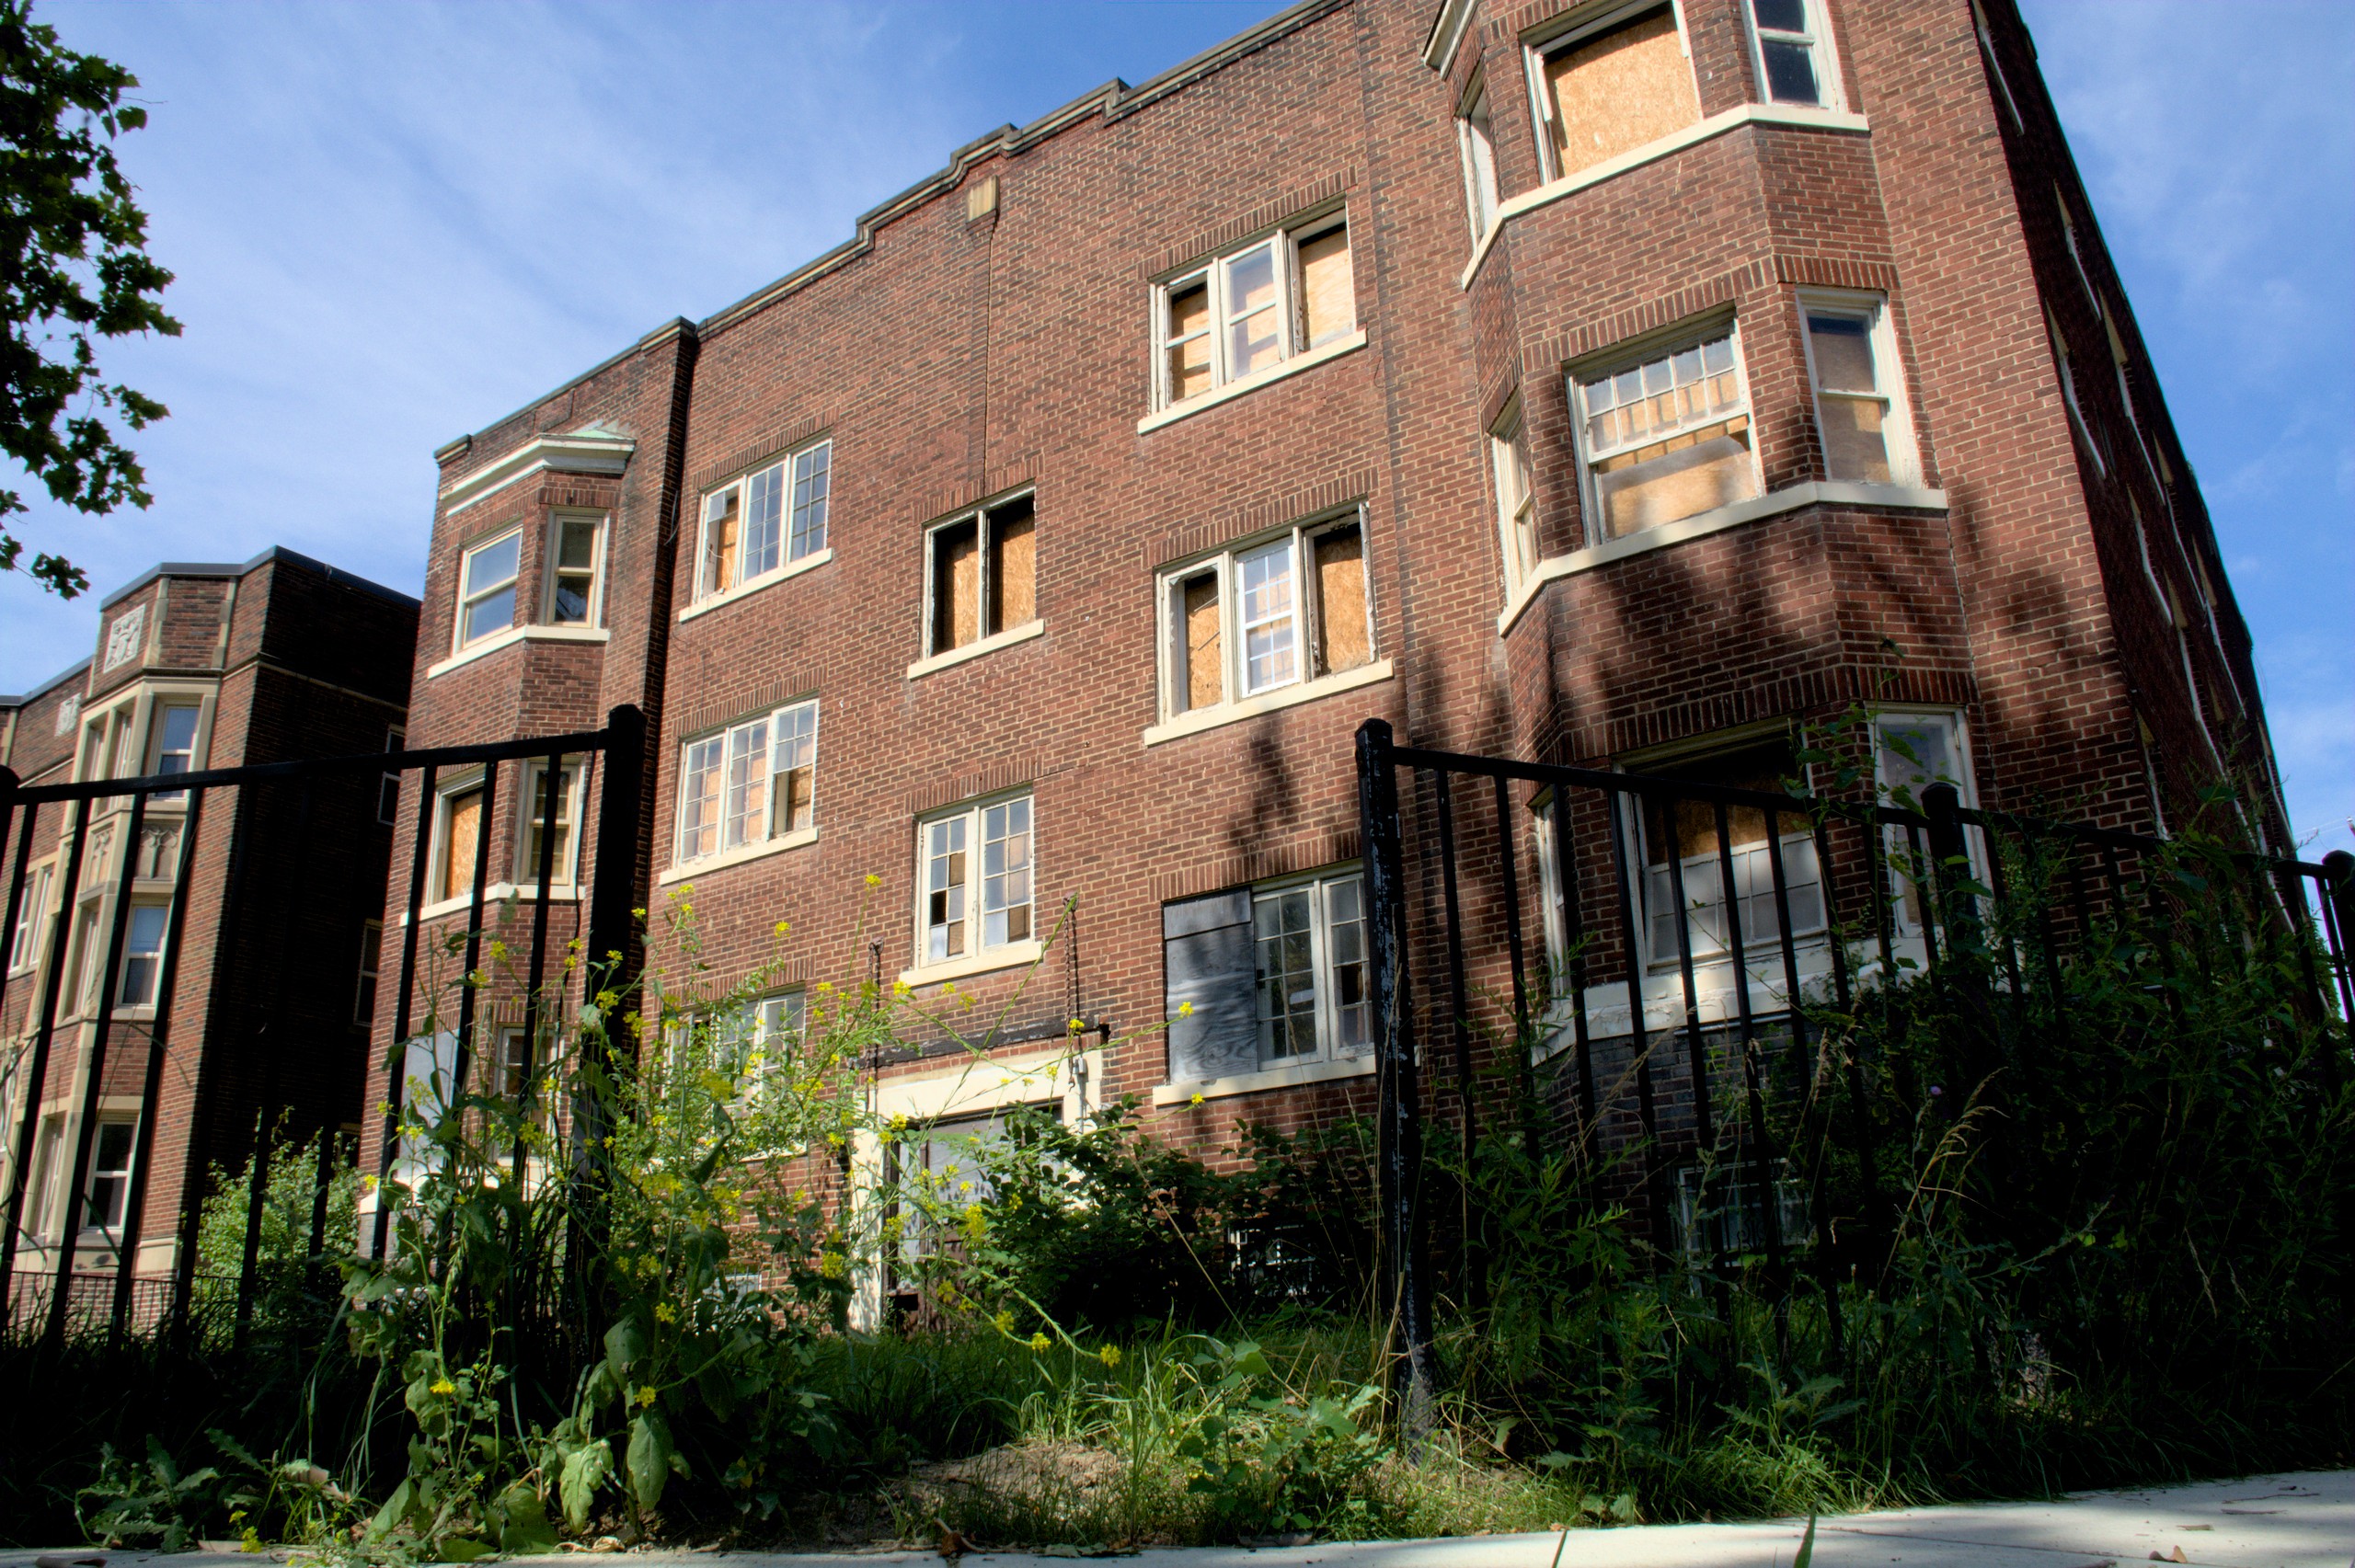 Boarded-up Shaker Square apartment could get new owner, landlord says